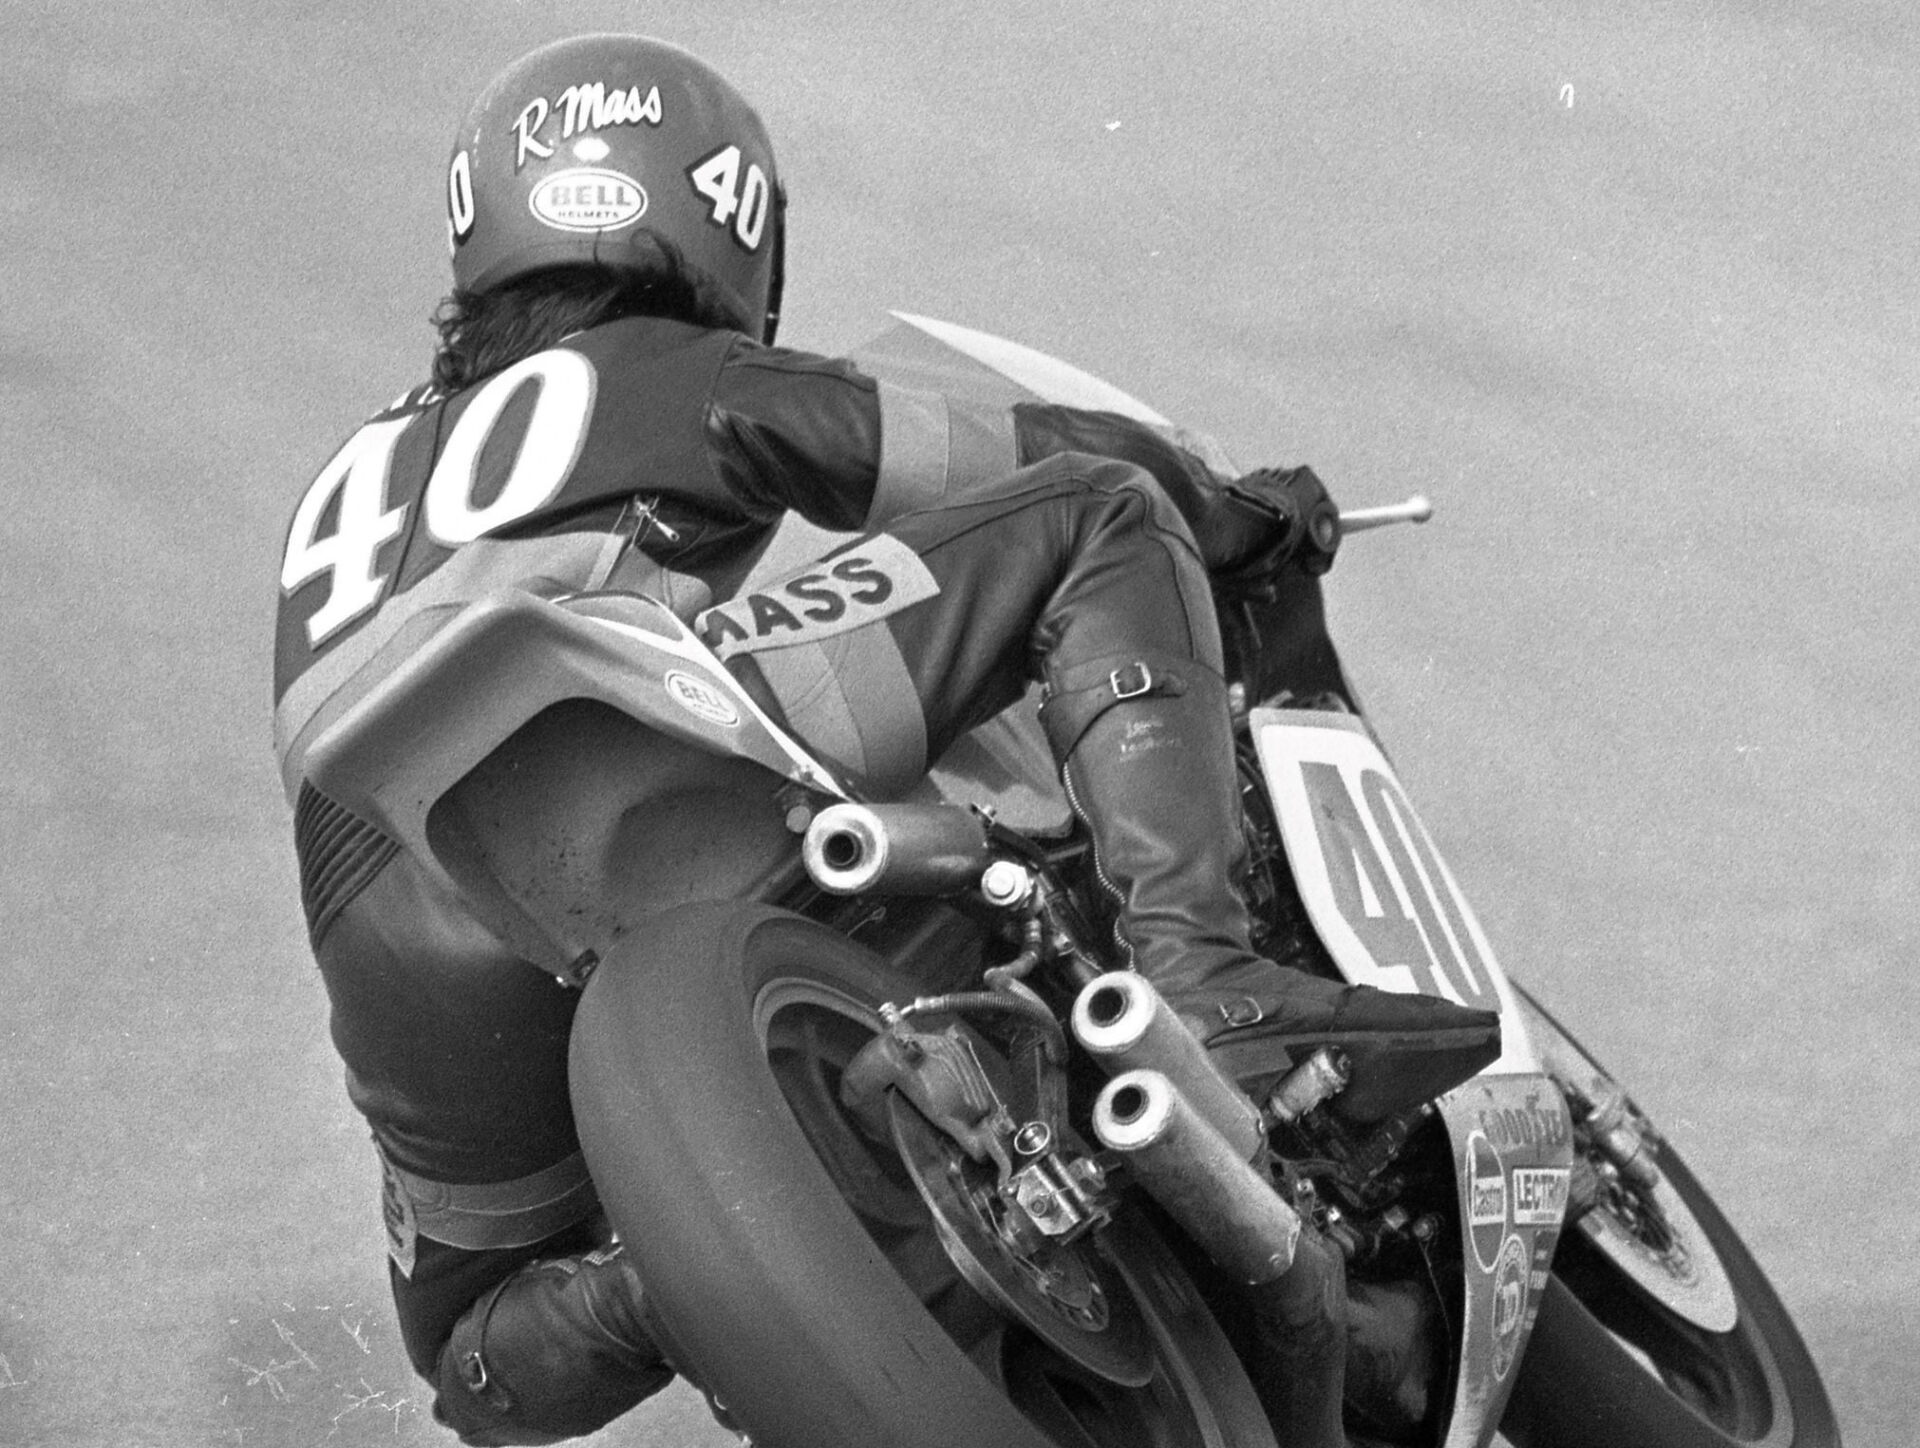 Ron Mass (40) in action on his Yamaha TZ750 back in the day. Photo courtesy Ron Mass Collection.